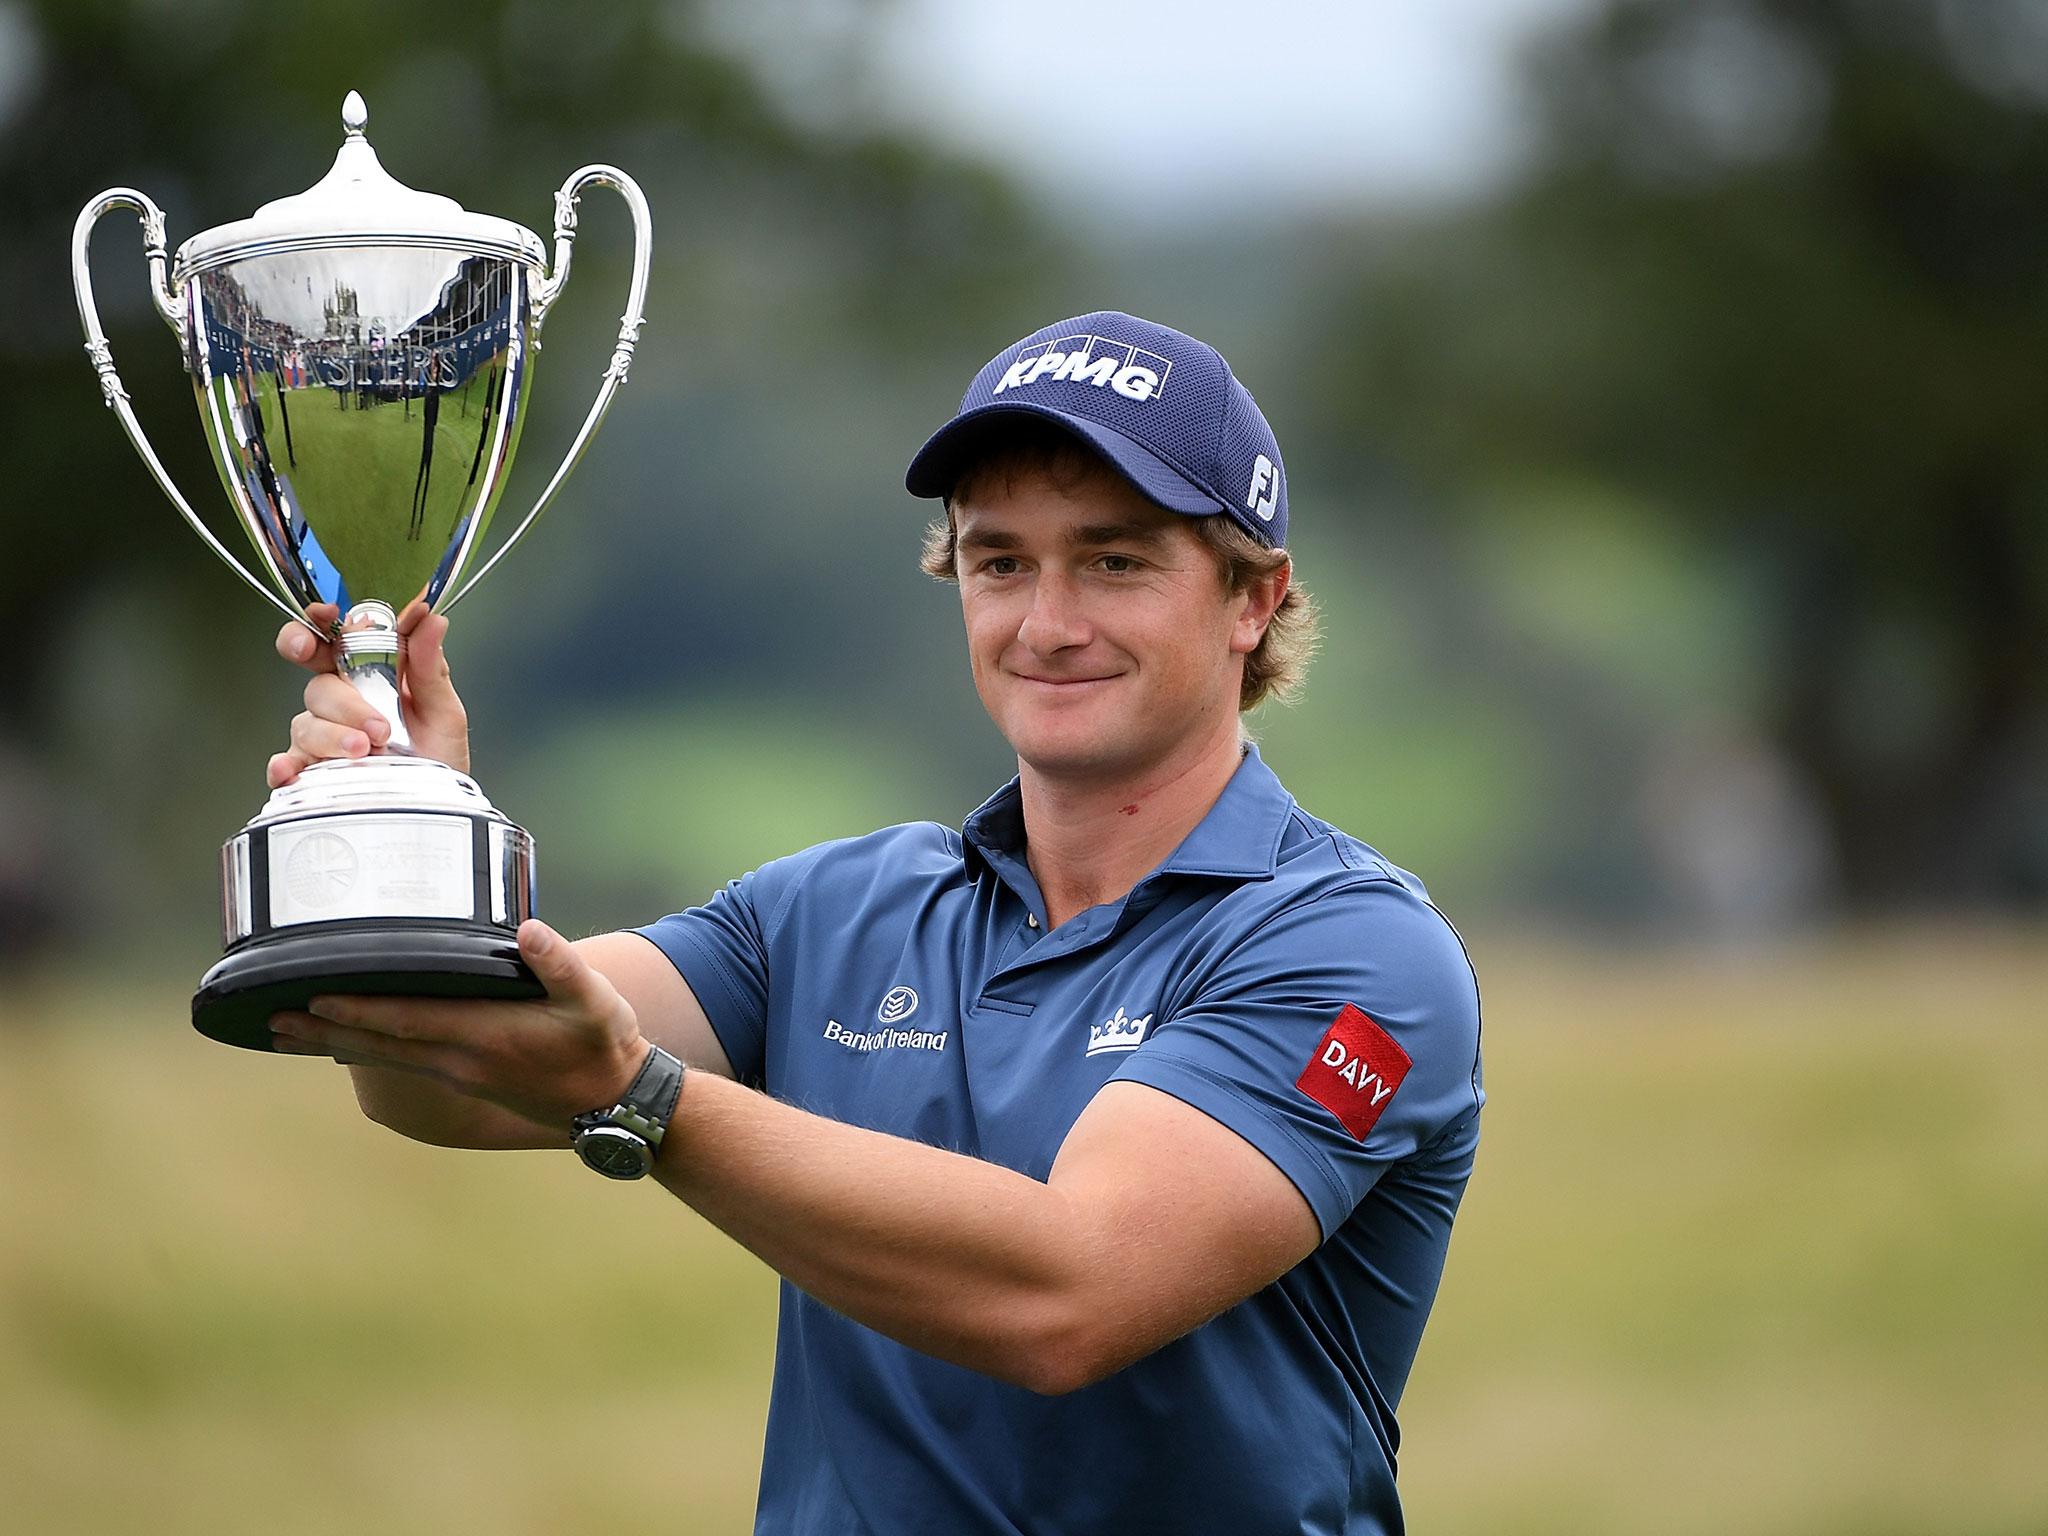 Paul Dunne breaks into the world's top 100 for the first time